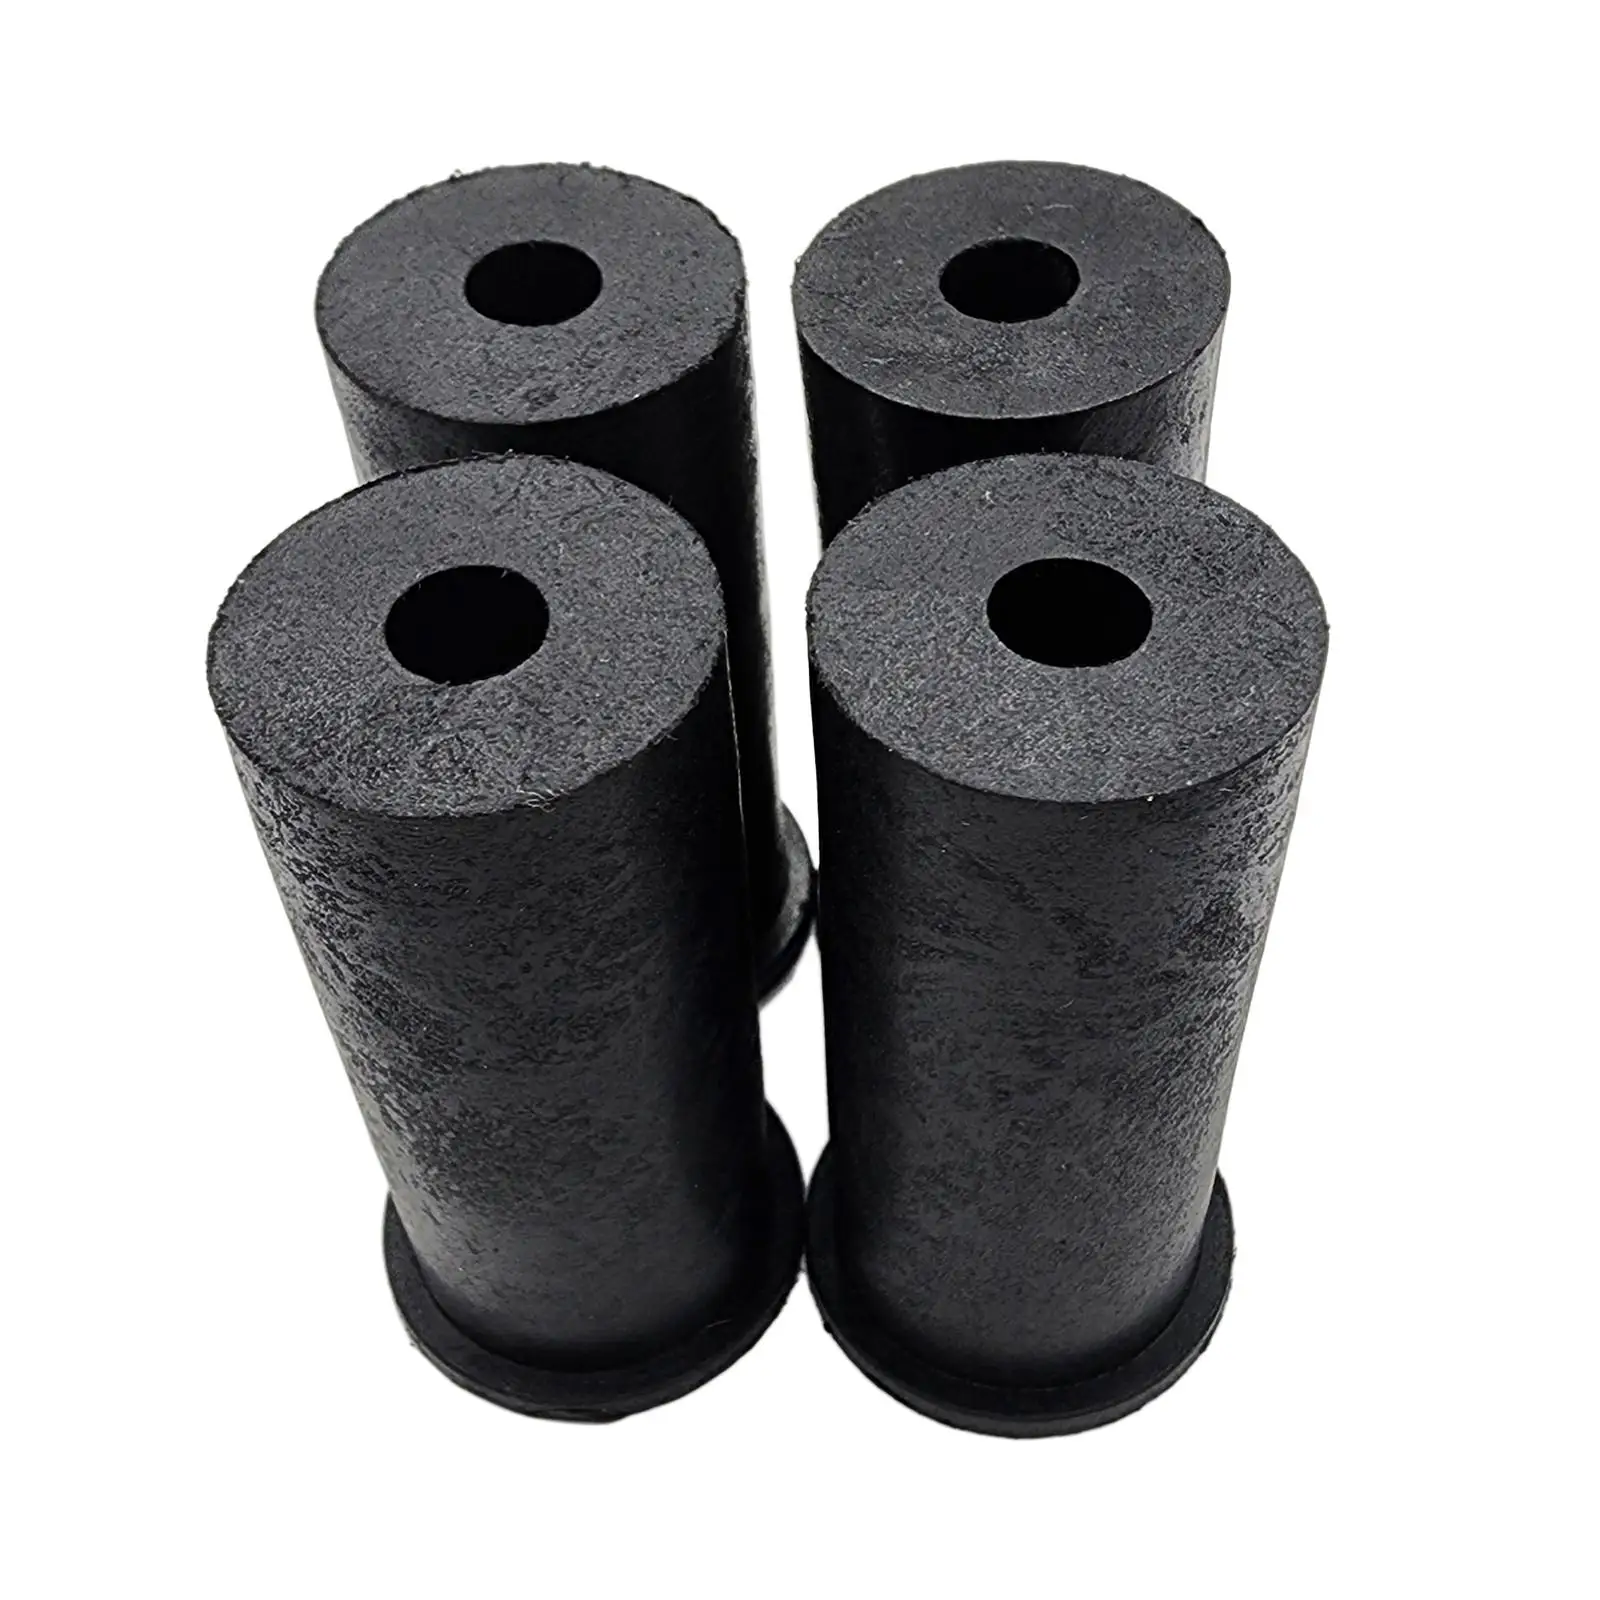 4Pcs Metal Door Bushings Replacement Spare Parts Easy Installation Accessory